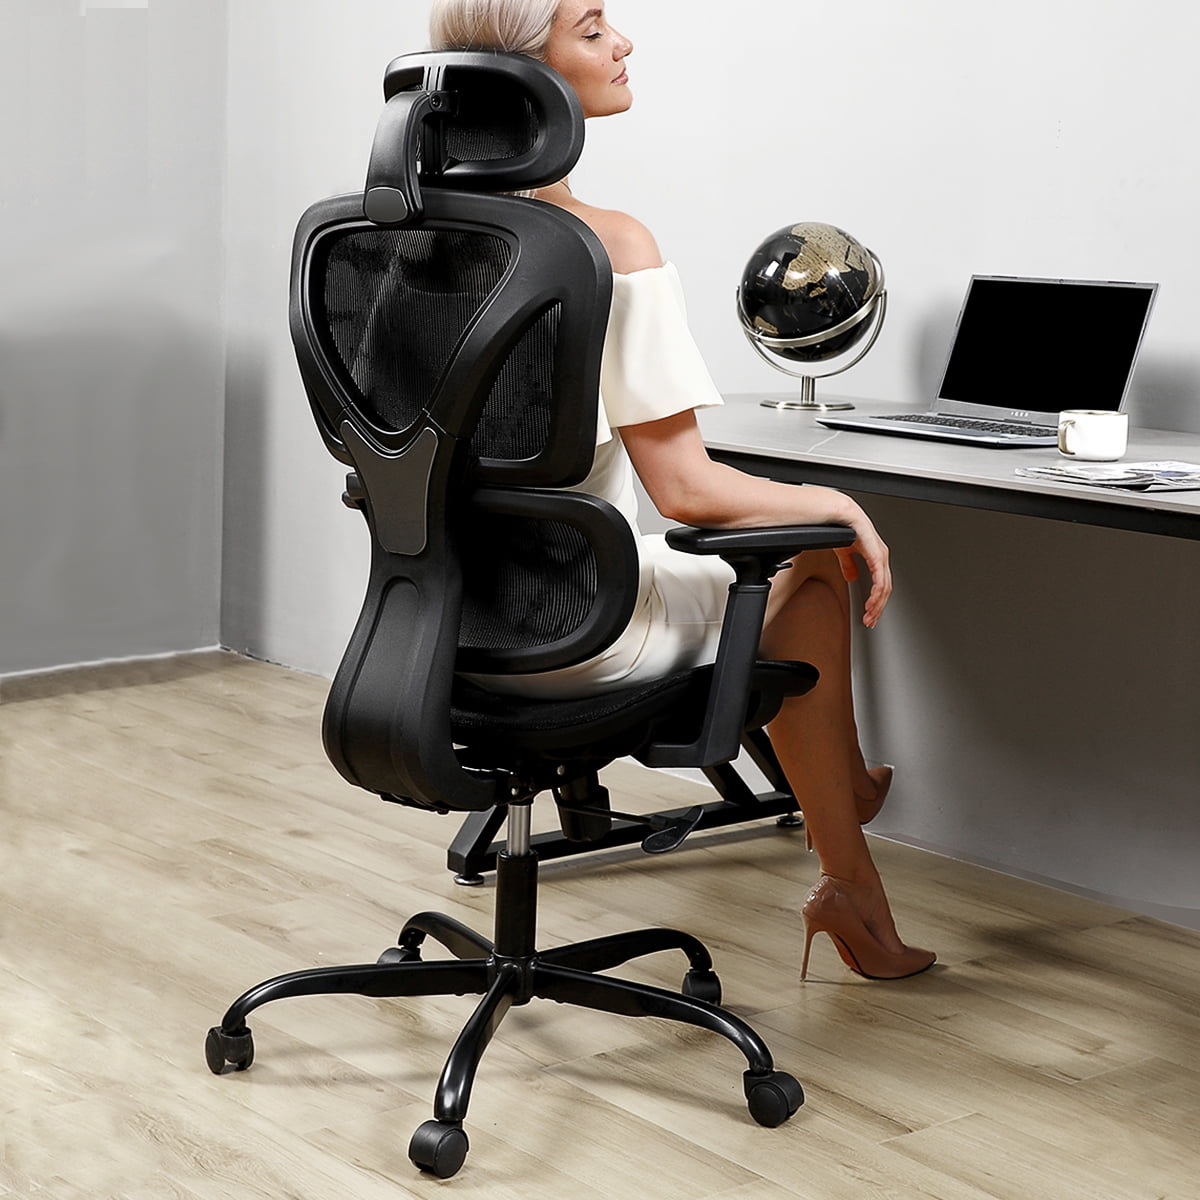 Ergonomic Office Chair, High Back Adjustable Computer Desk Chair with Lumbar Support, 300lb, Black-C, Size: 27.9 Large x 25.2 W x 46.1-52.2 H